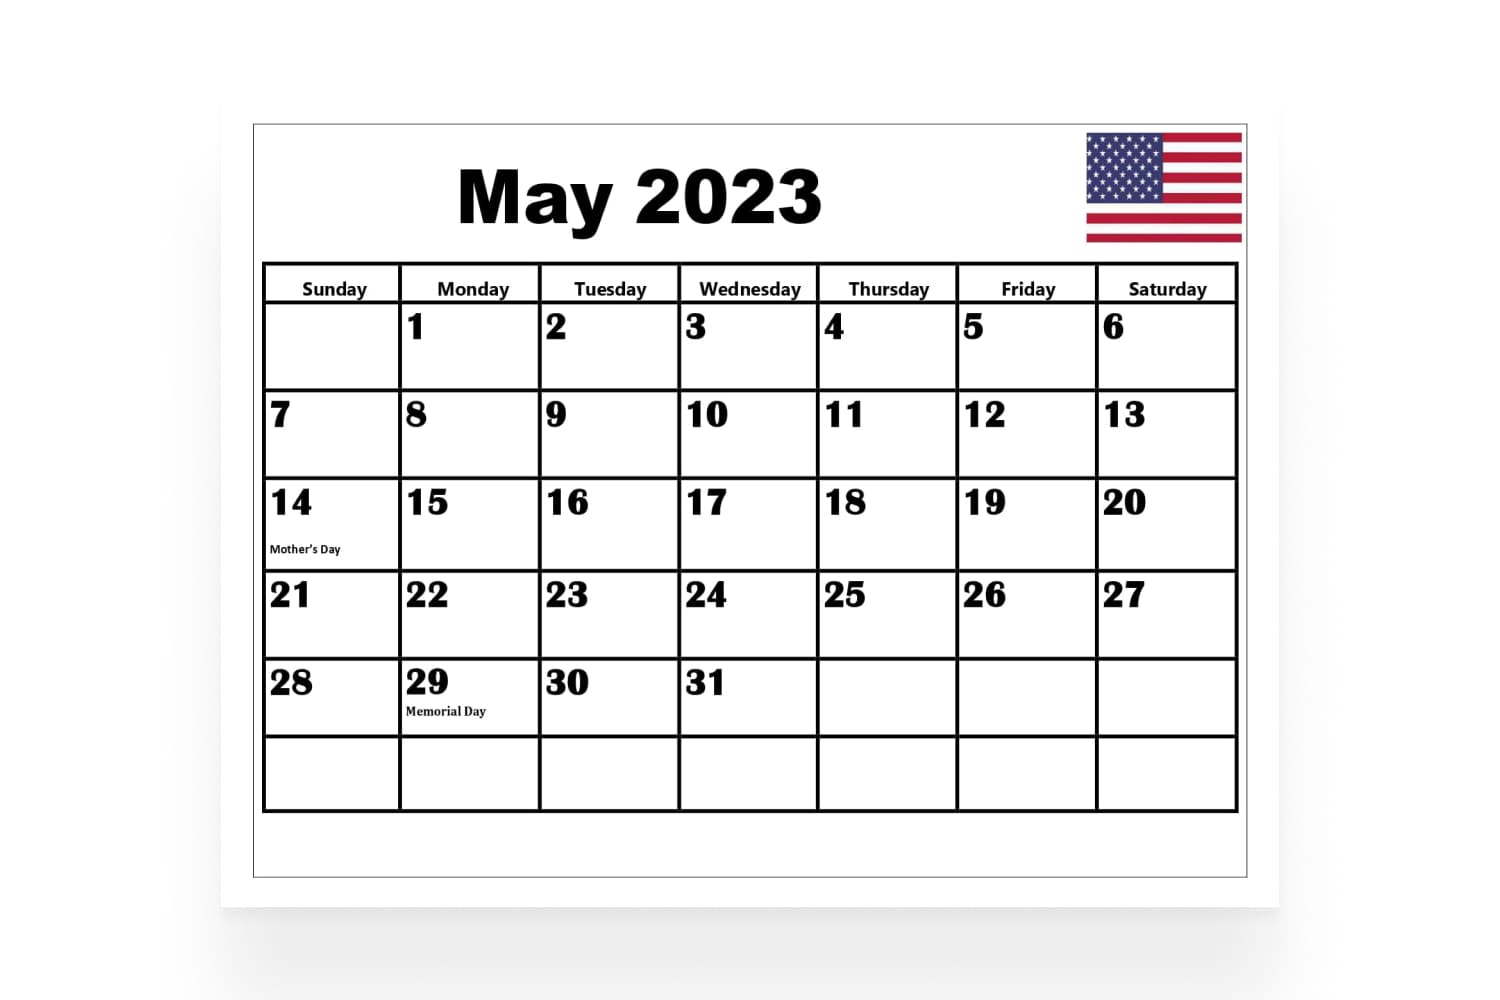 Chic and minimalistic May 2023 calendarwith all national holidays in the United States.